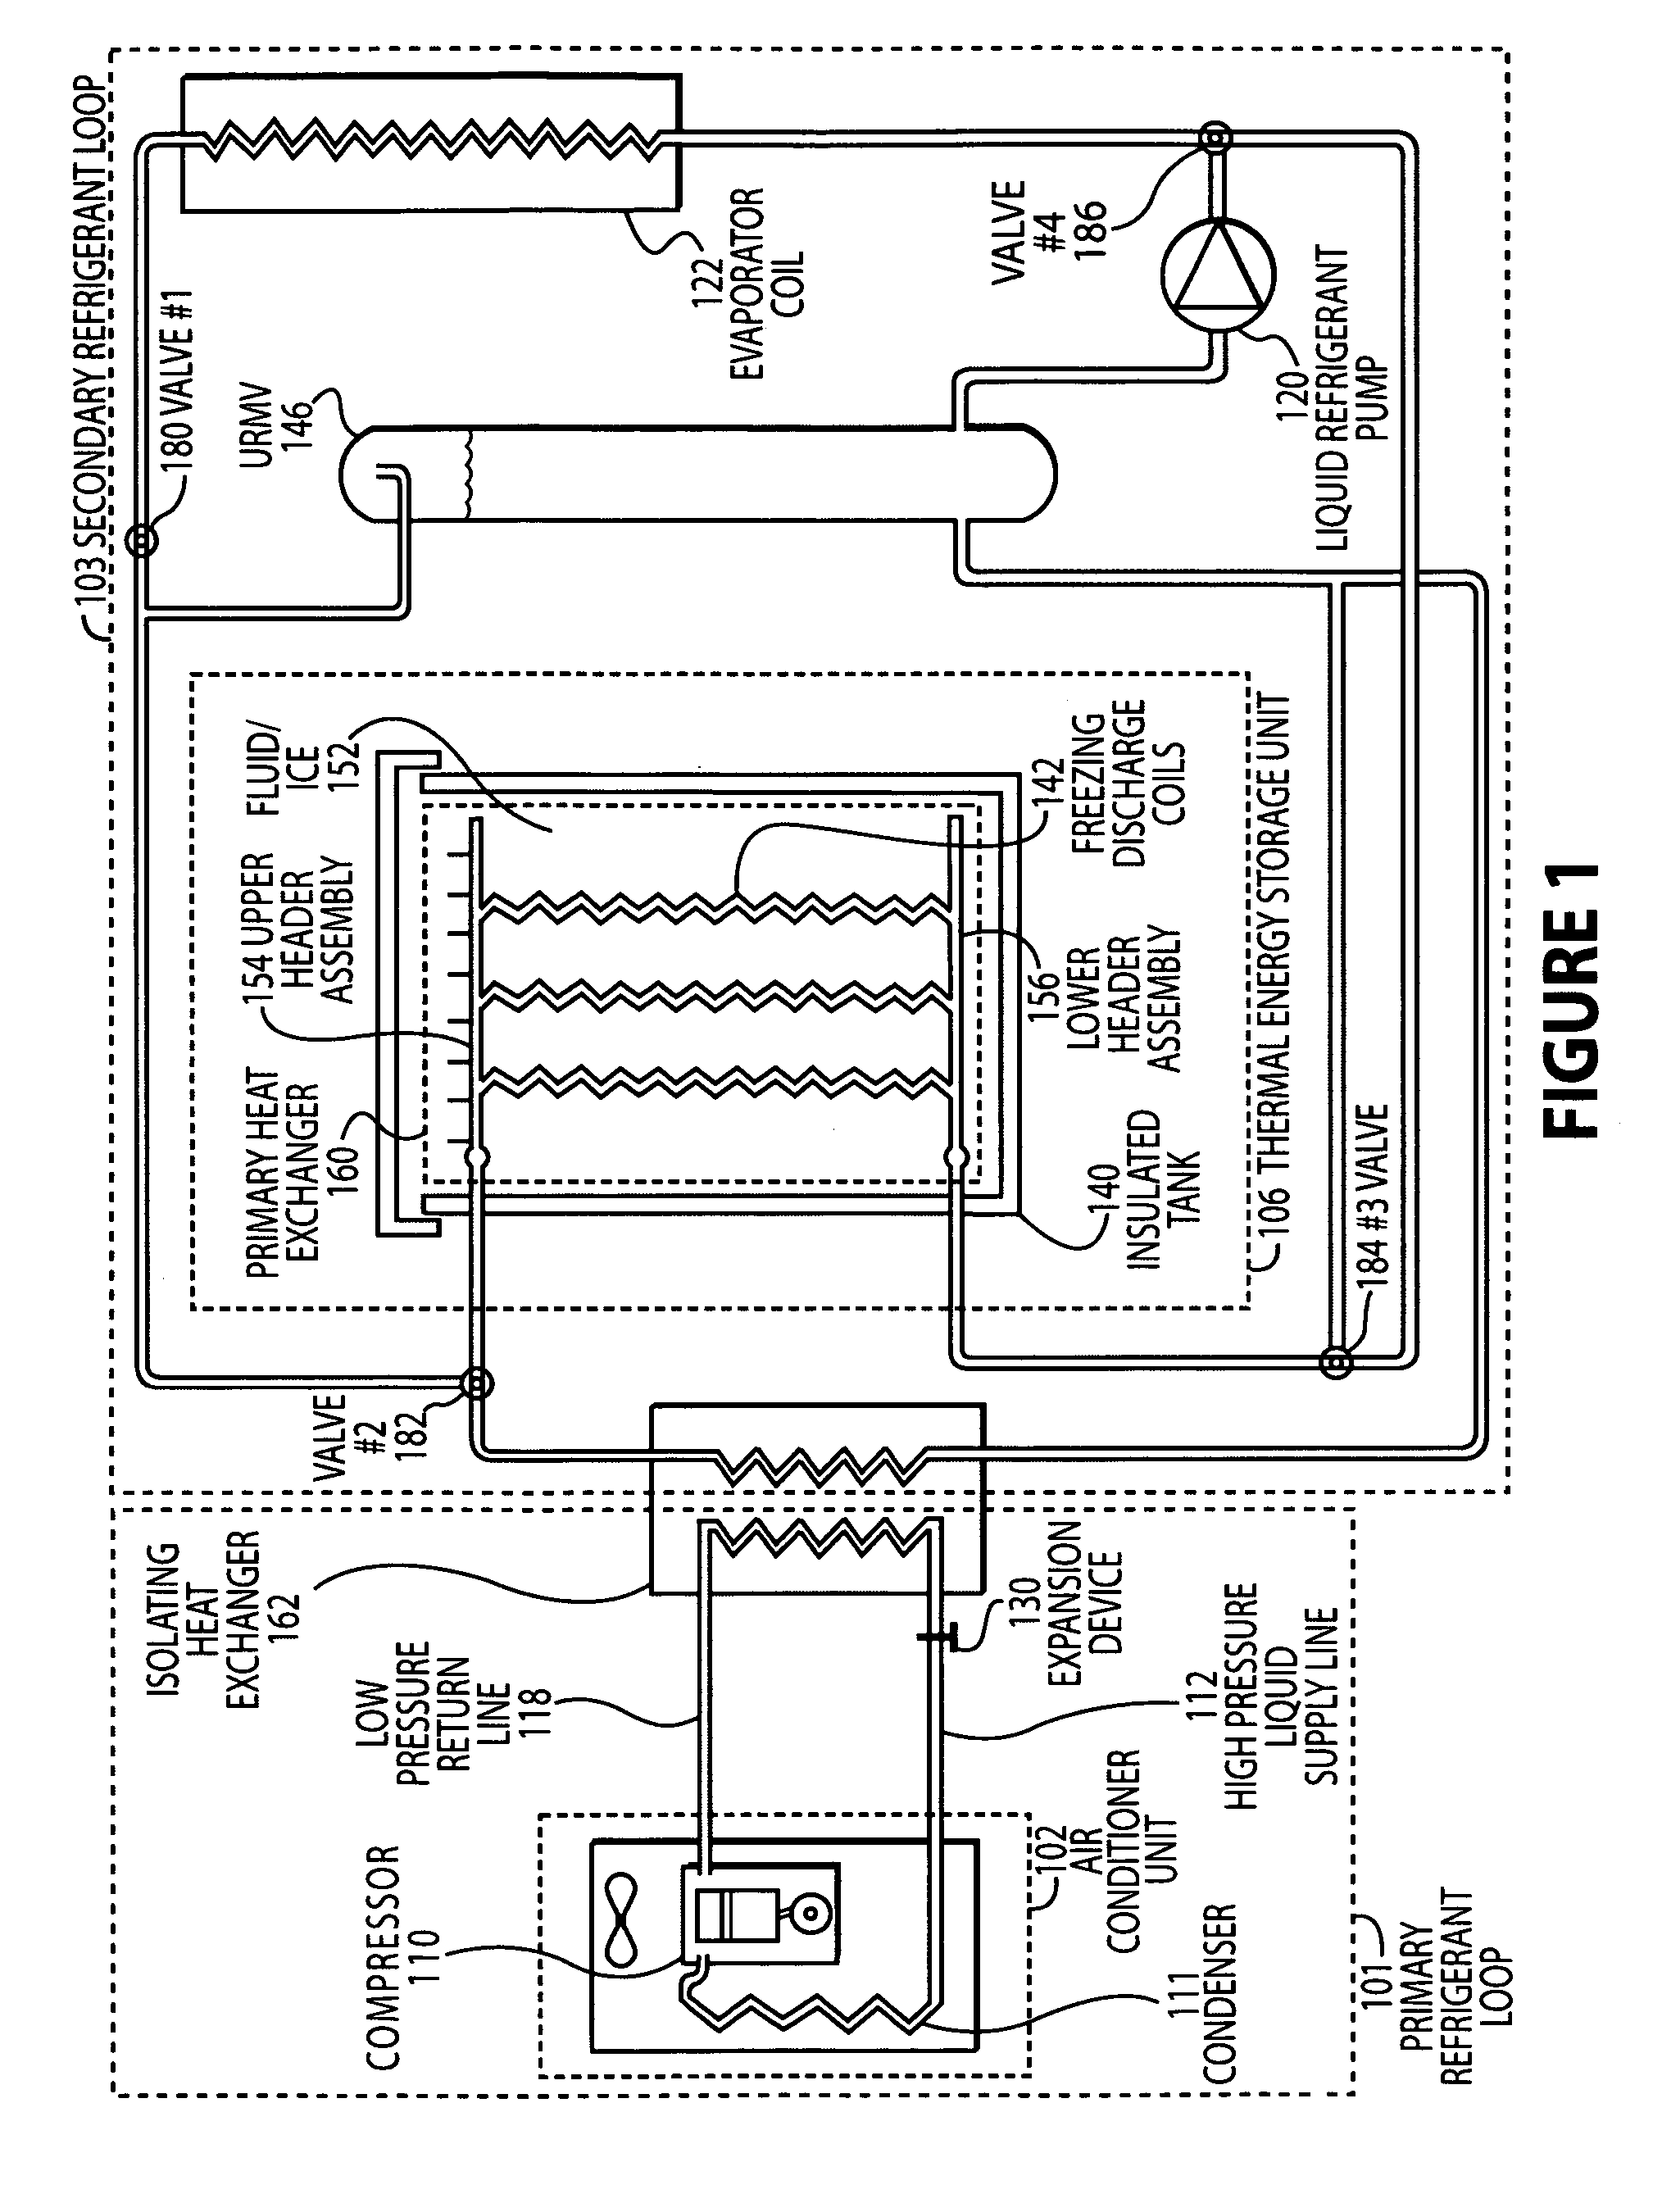 Thermal energy storage and cooling system with gravity fed secondary refrigerant isolation